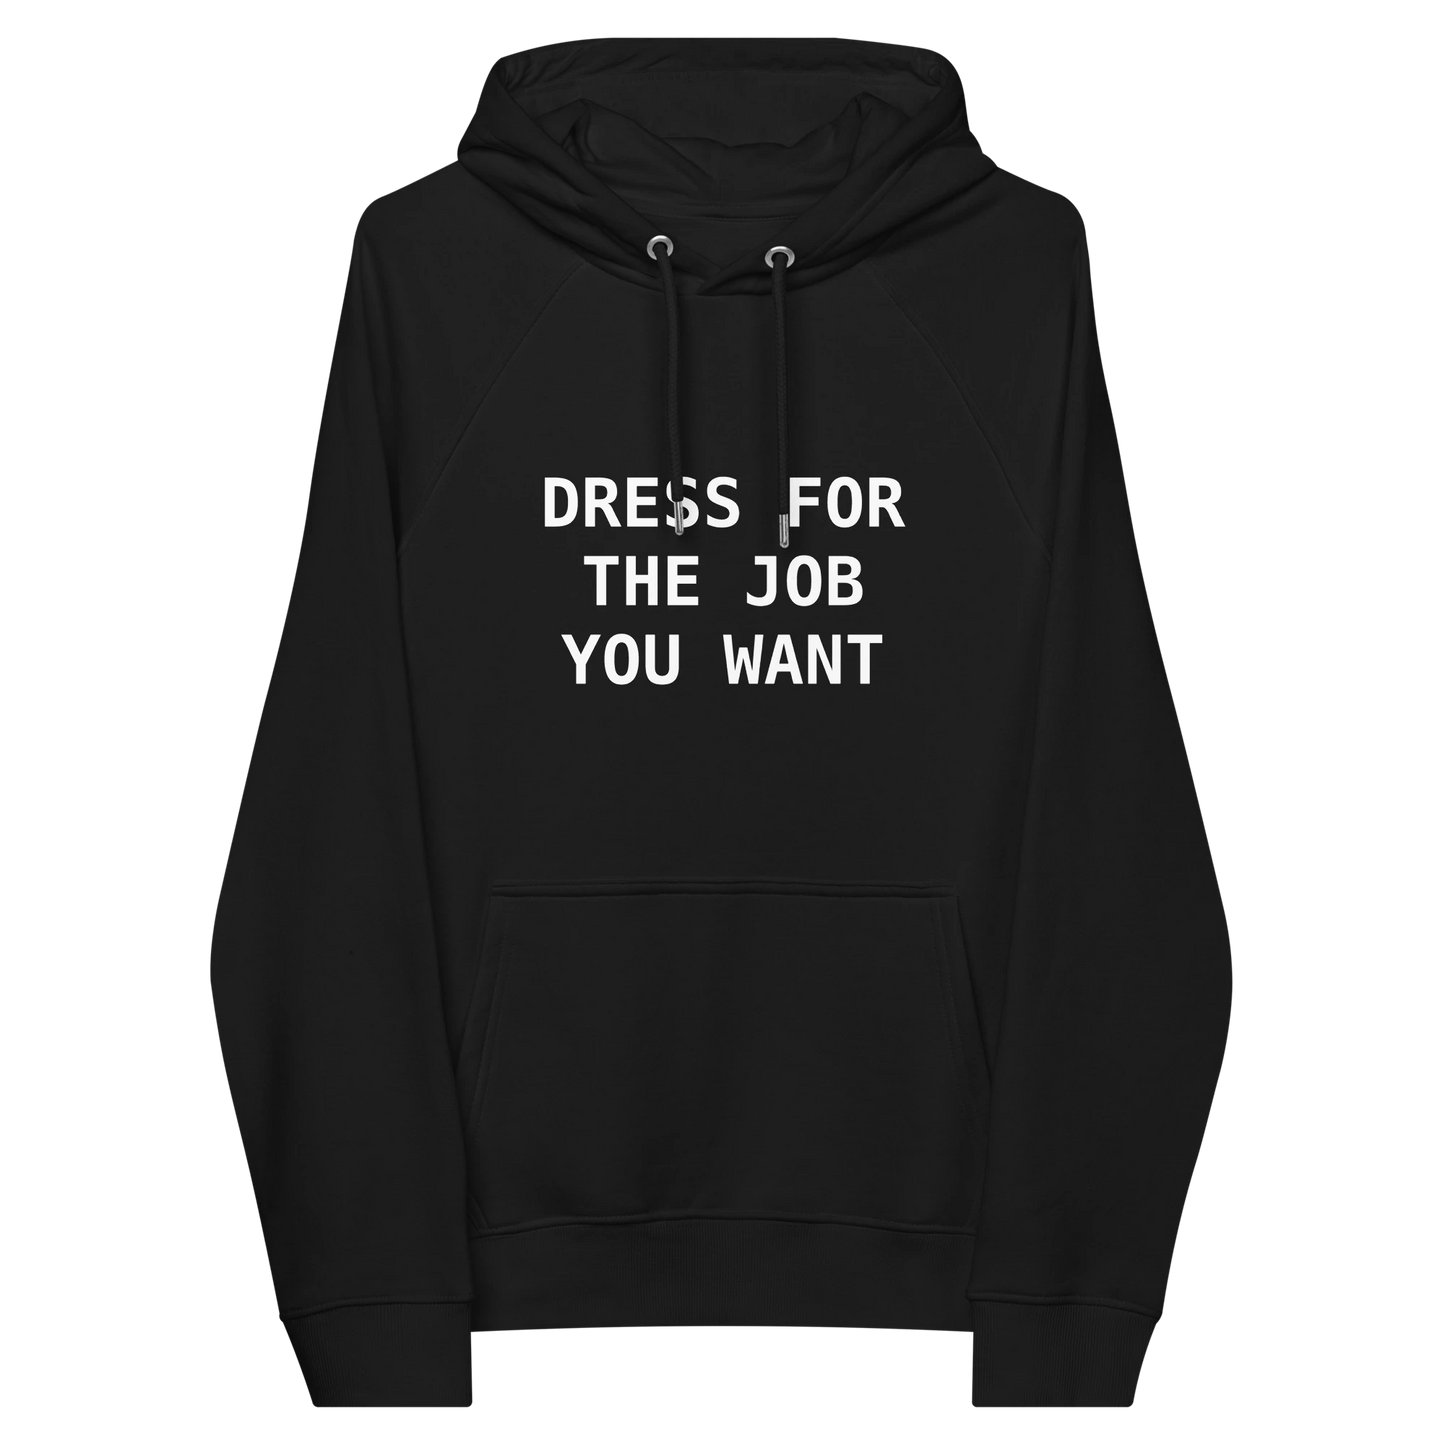 Dress for the job you want premium hoodie front flat 2 front